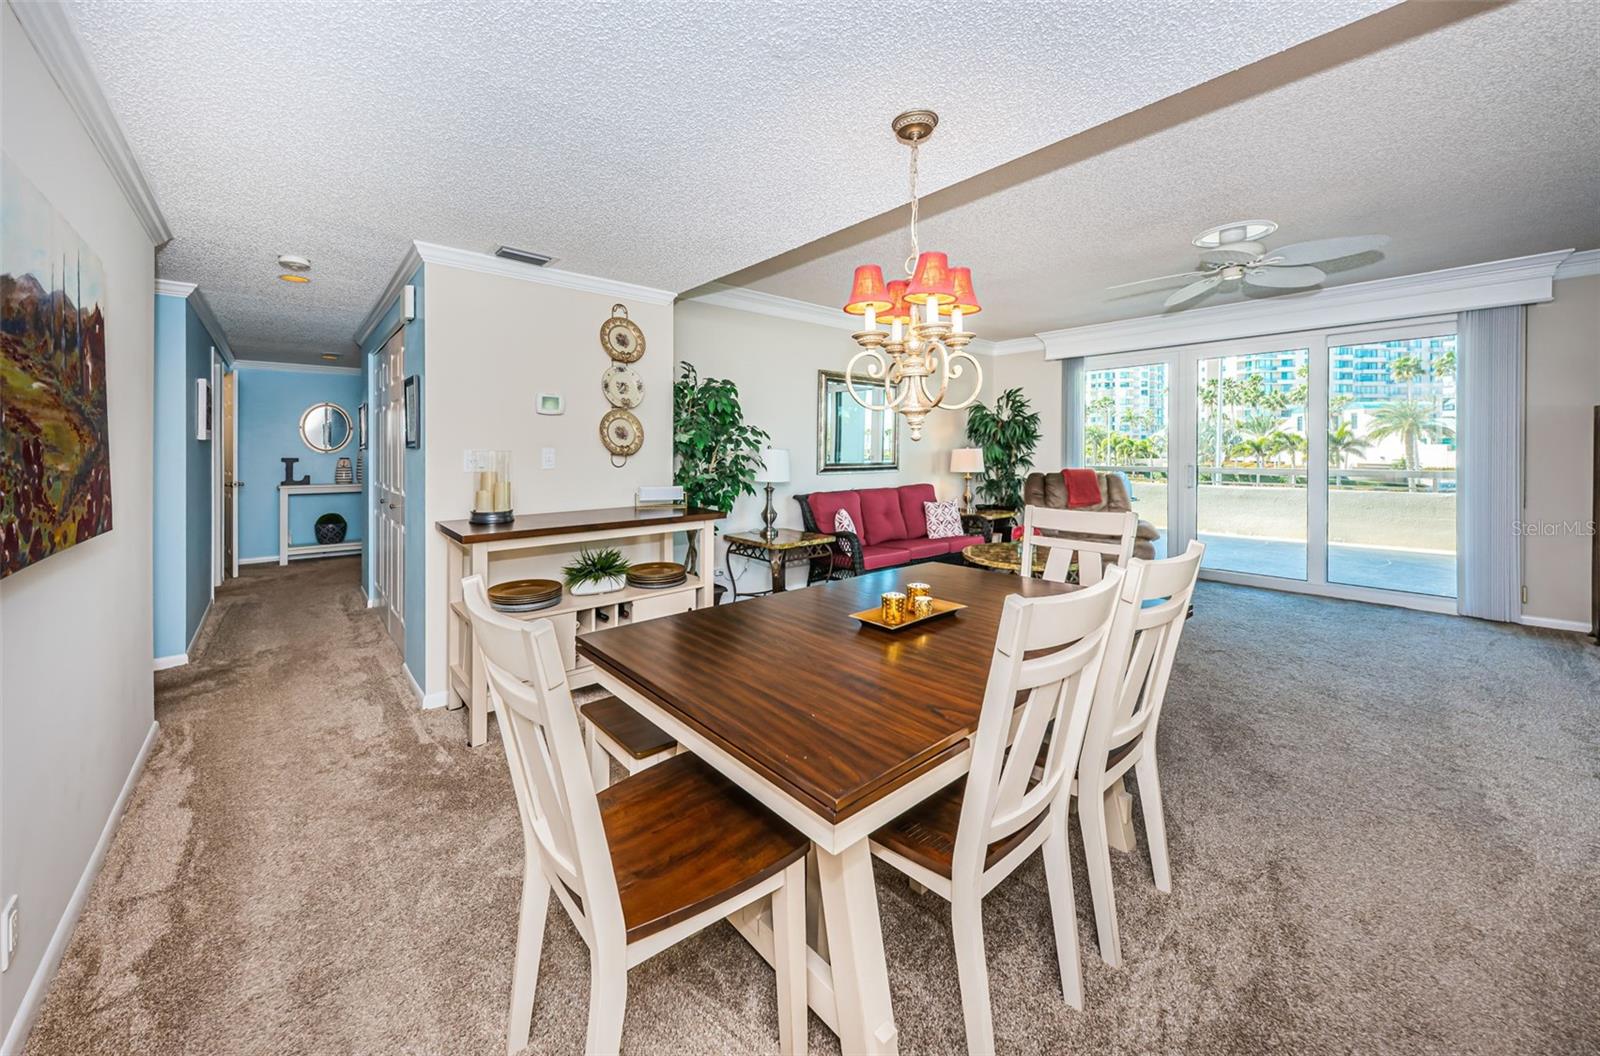 Spacious Floor Plan Dining Room & Great Room Offering Gulf Views with Terrace Access...Perfect for Entertaining!